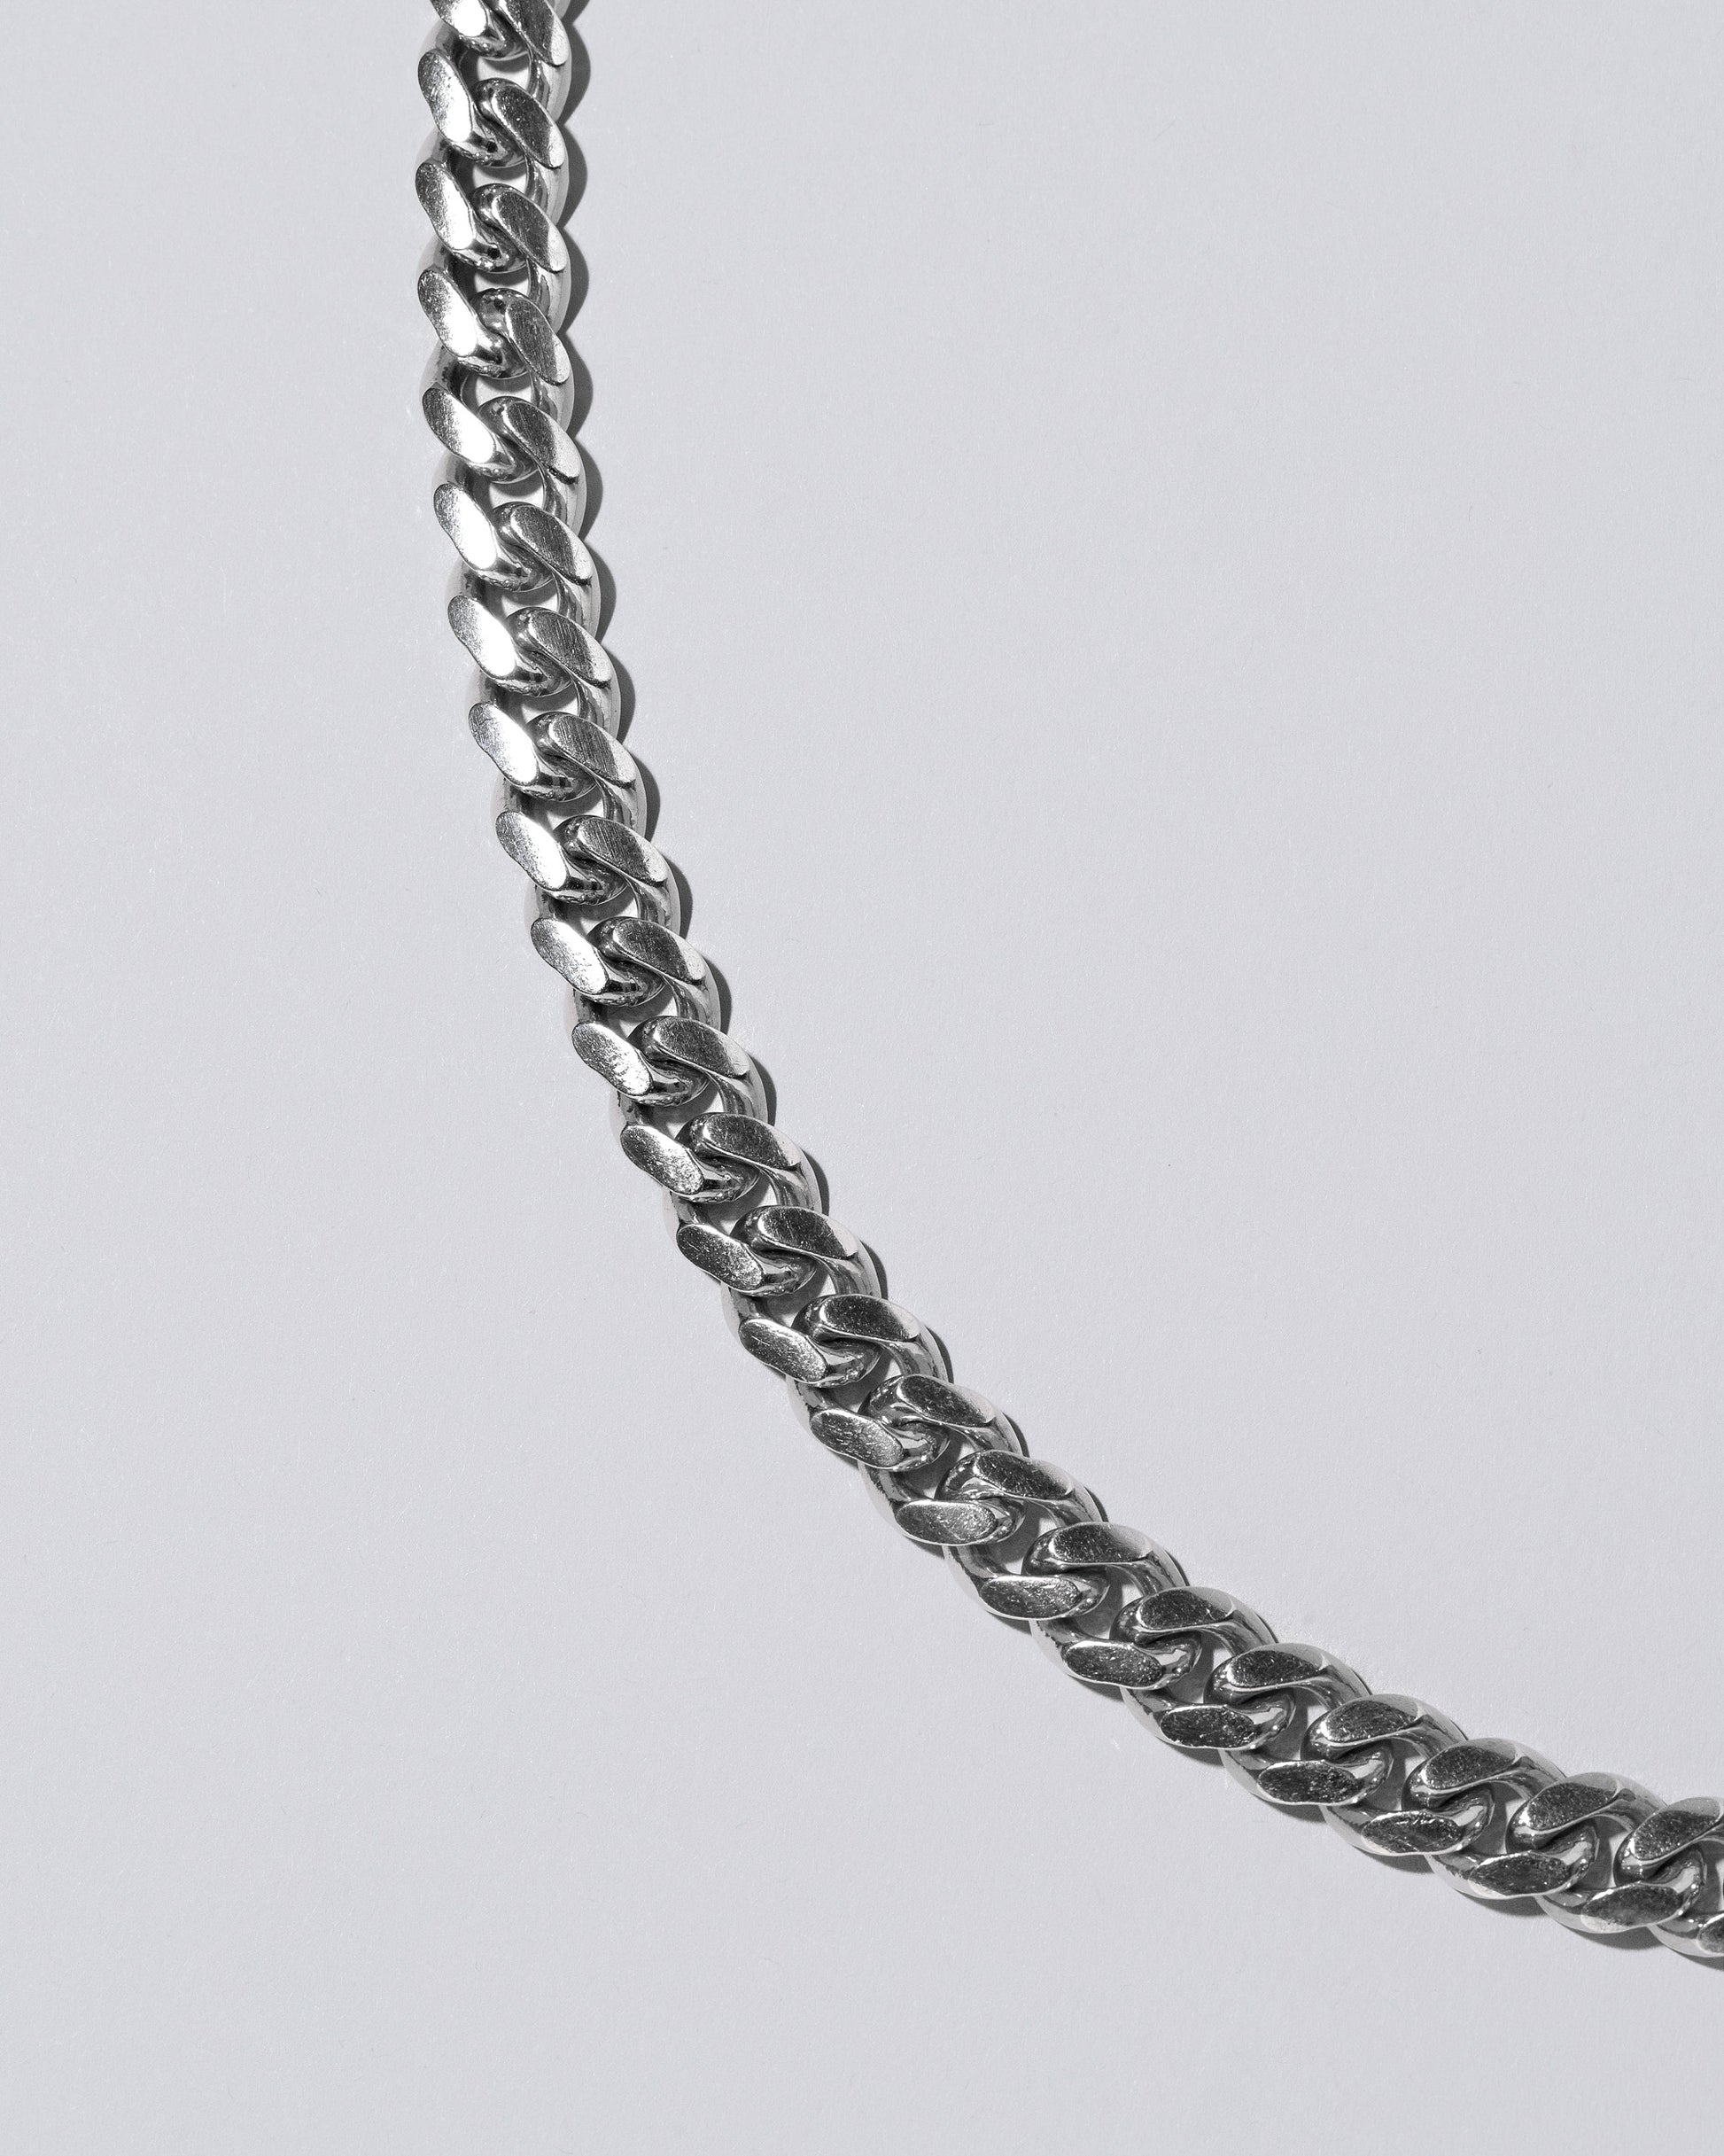 Closeup detail of the Silver Cuban Chain on light color background.